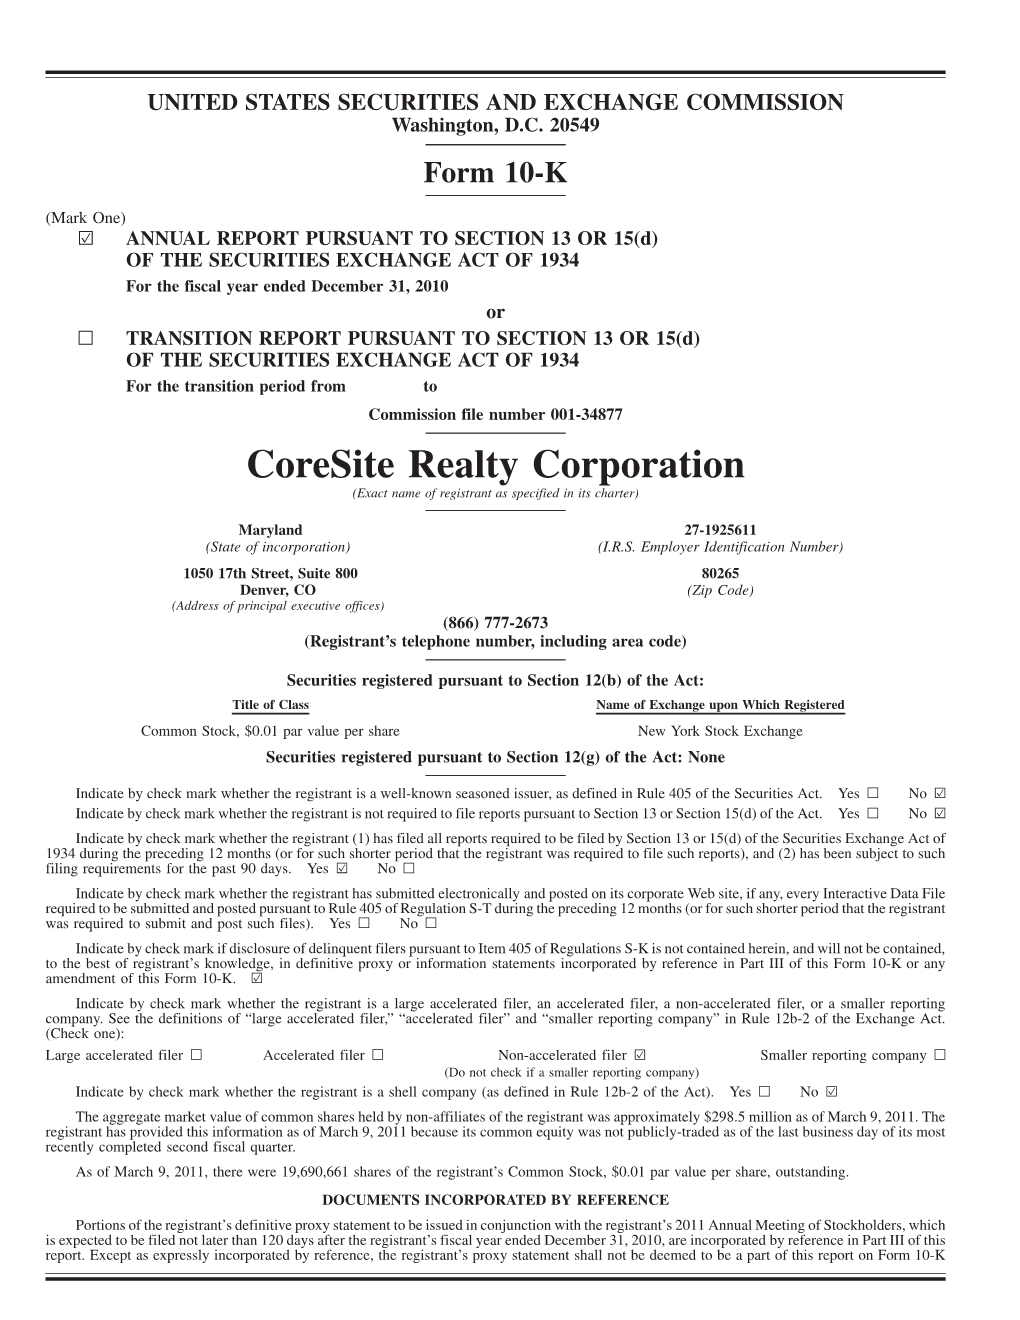 Coresite Realty Corporation (Exact Name of Registrant As Specified in Its Charter)